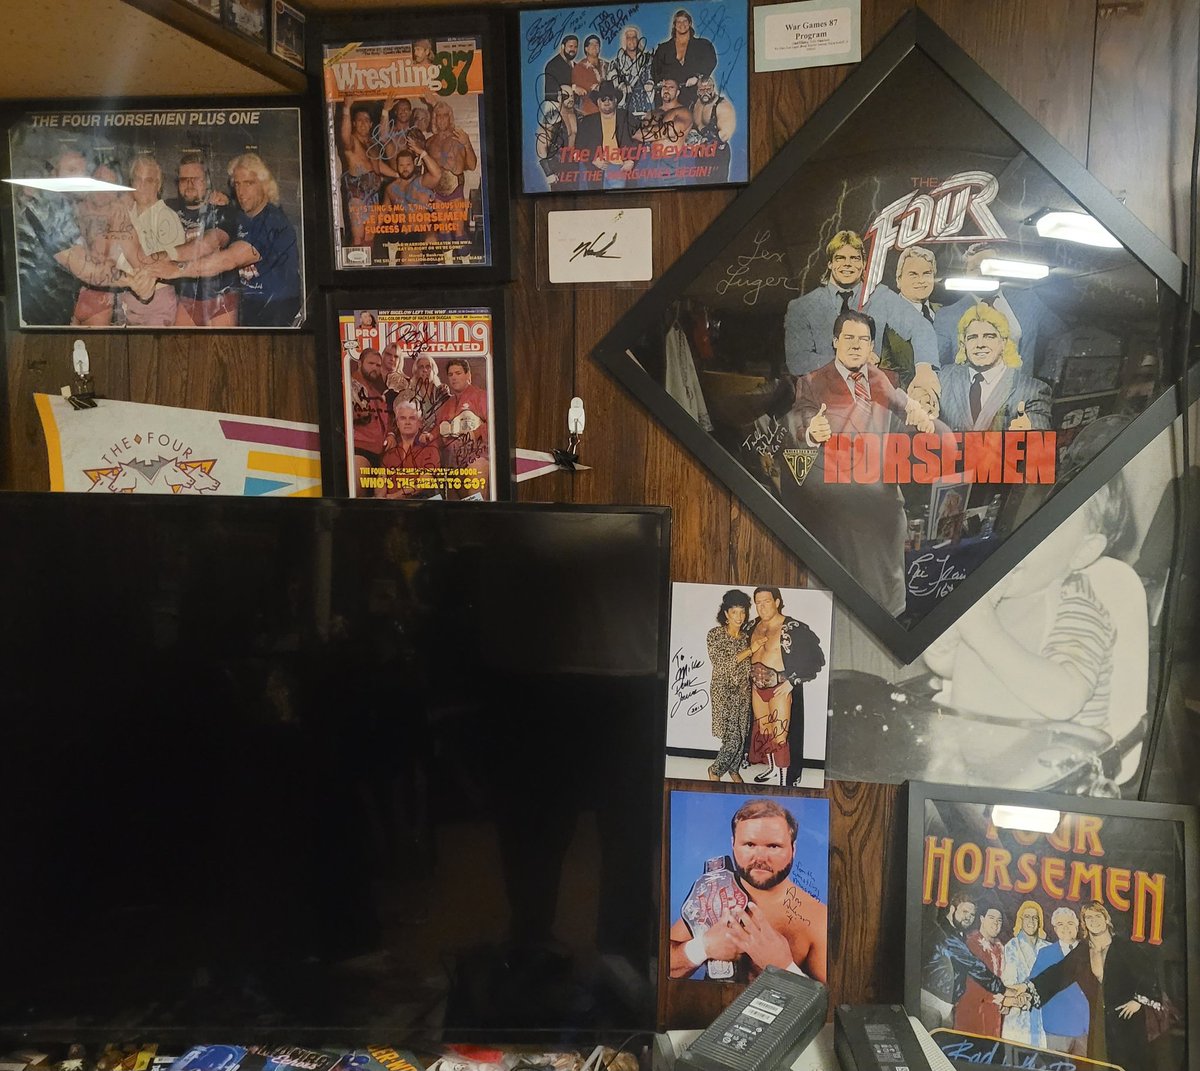 Moving stuff around/re-organizing as new stuff comes in. While some areas will take a hit, I'm pleased with how the new Four Horsemen display came out. @80_wrestling @Philcool27 @rohcary @TheArnShow @paulybwell @GenuineLexLuger